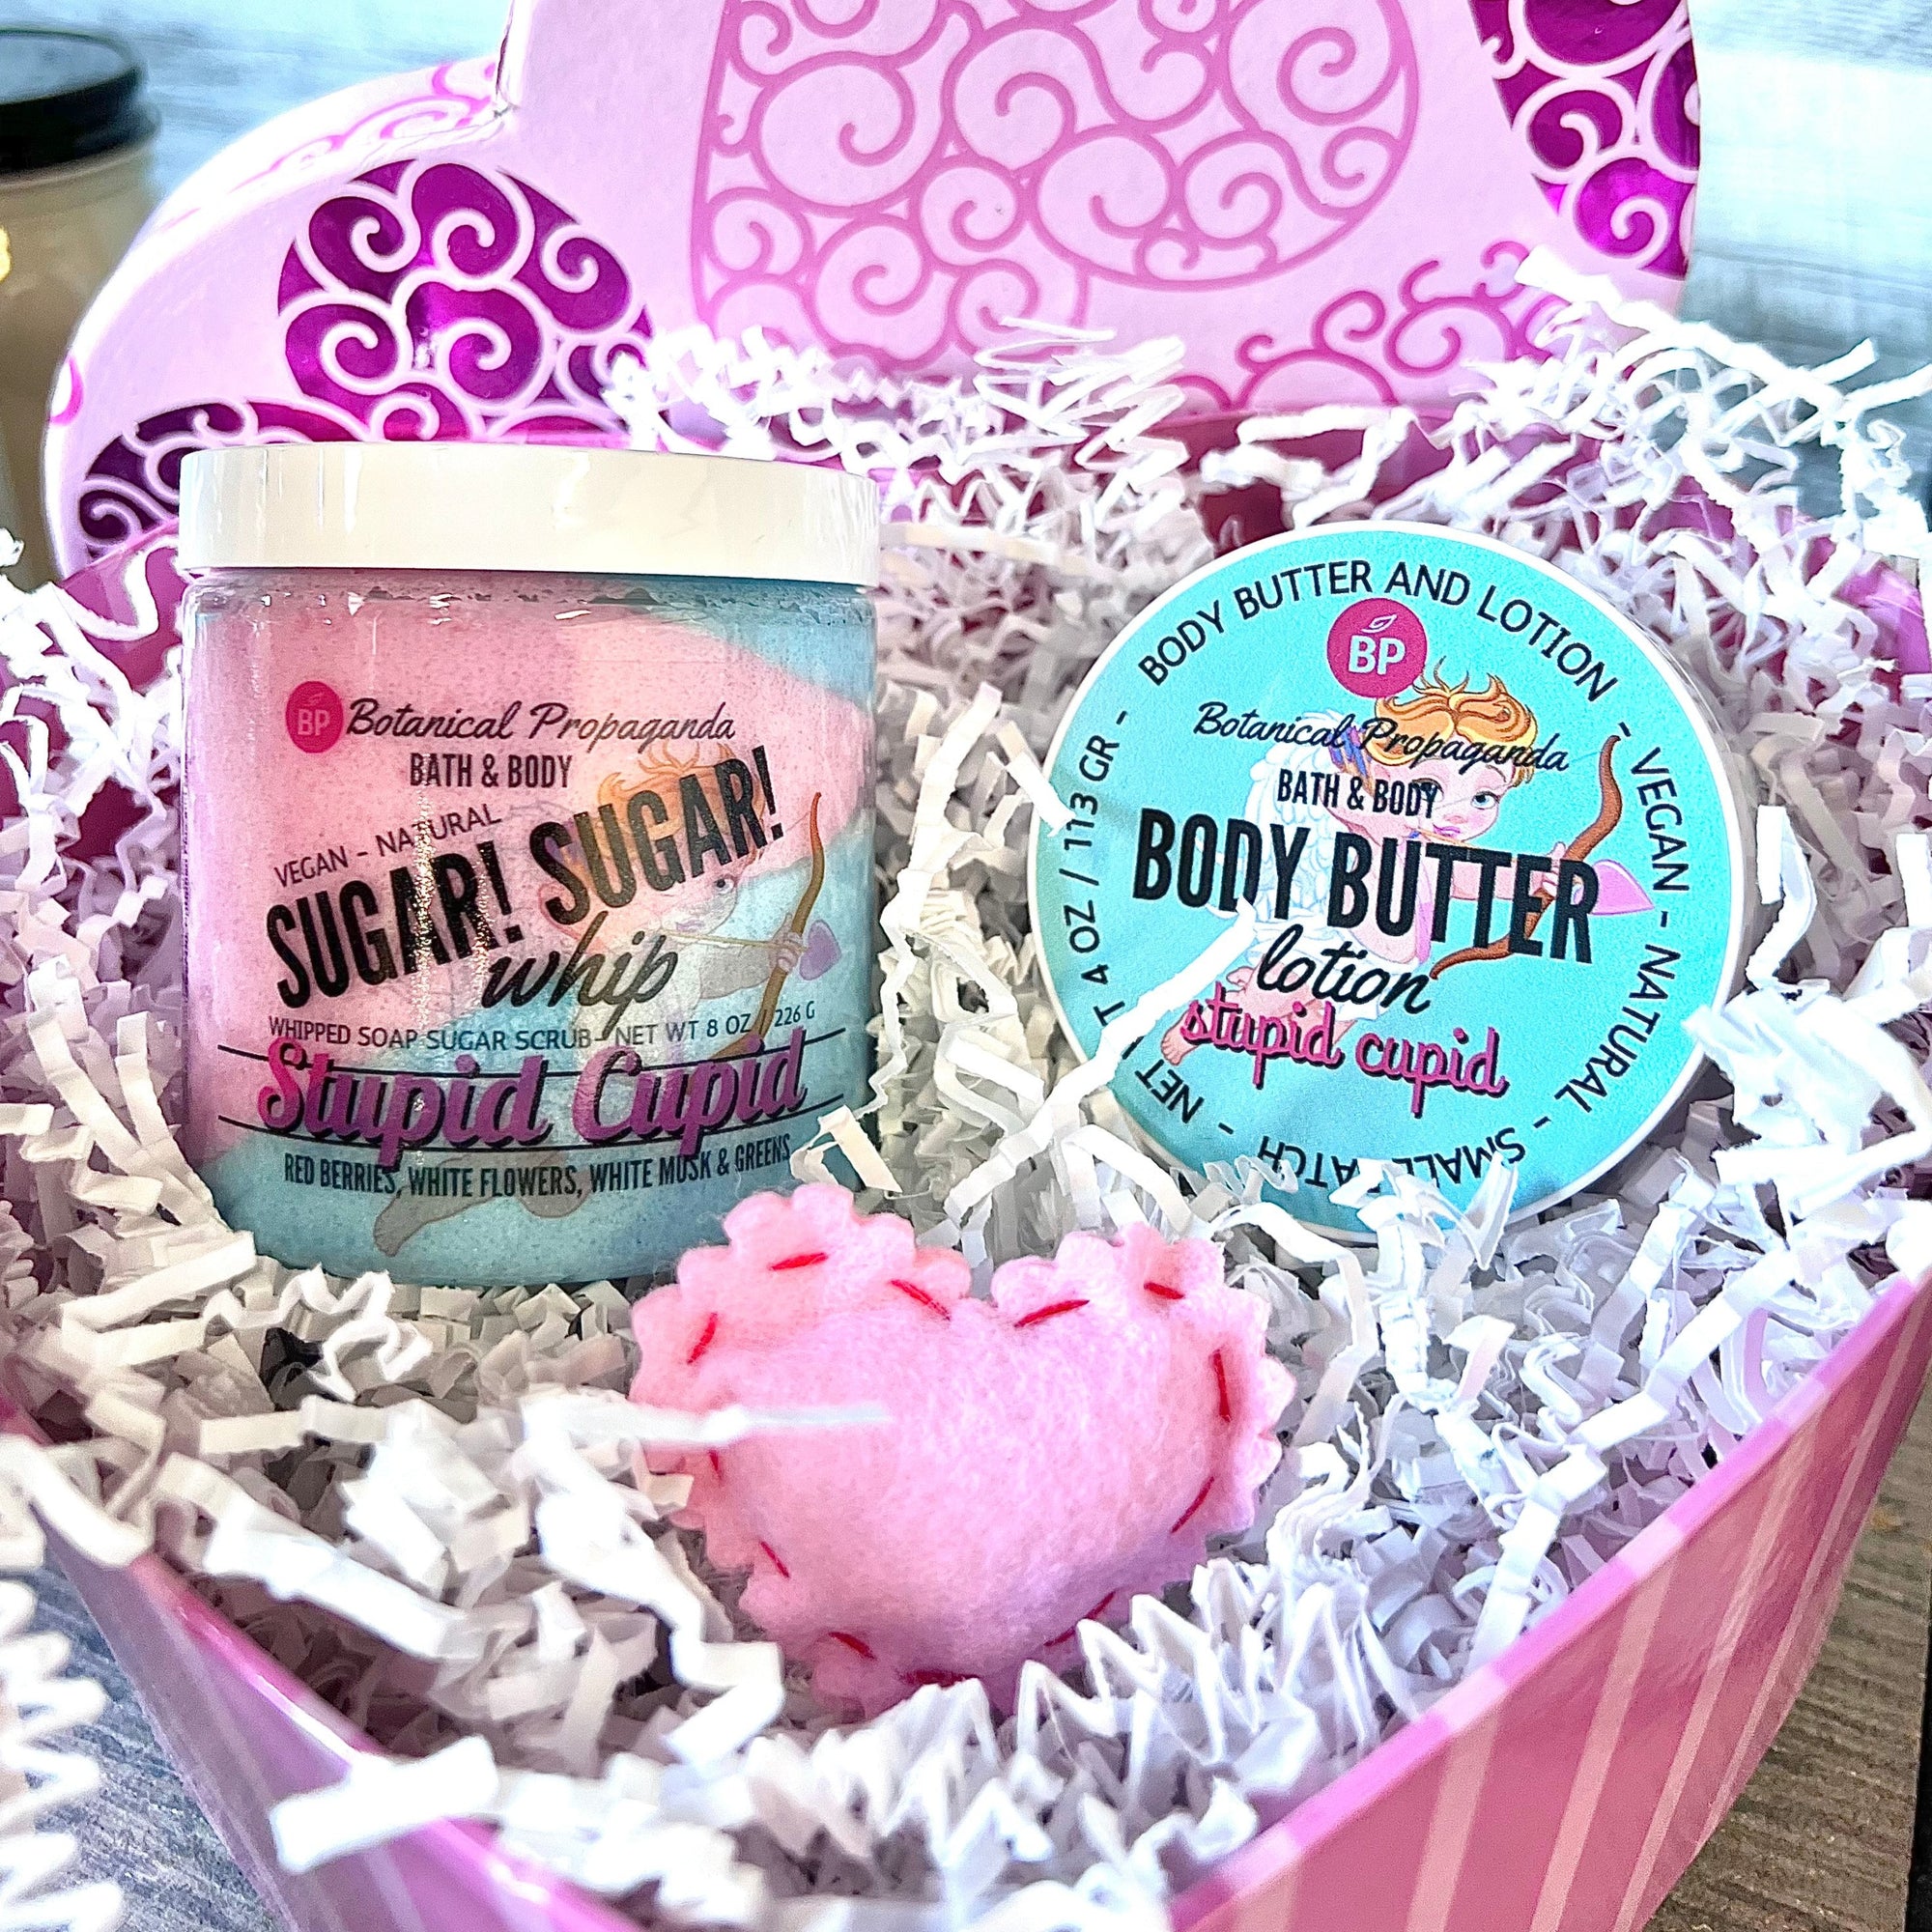 Stupid Cupid Bundle- Sugar Whip & Body Butter/Lotion